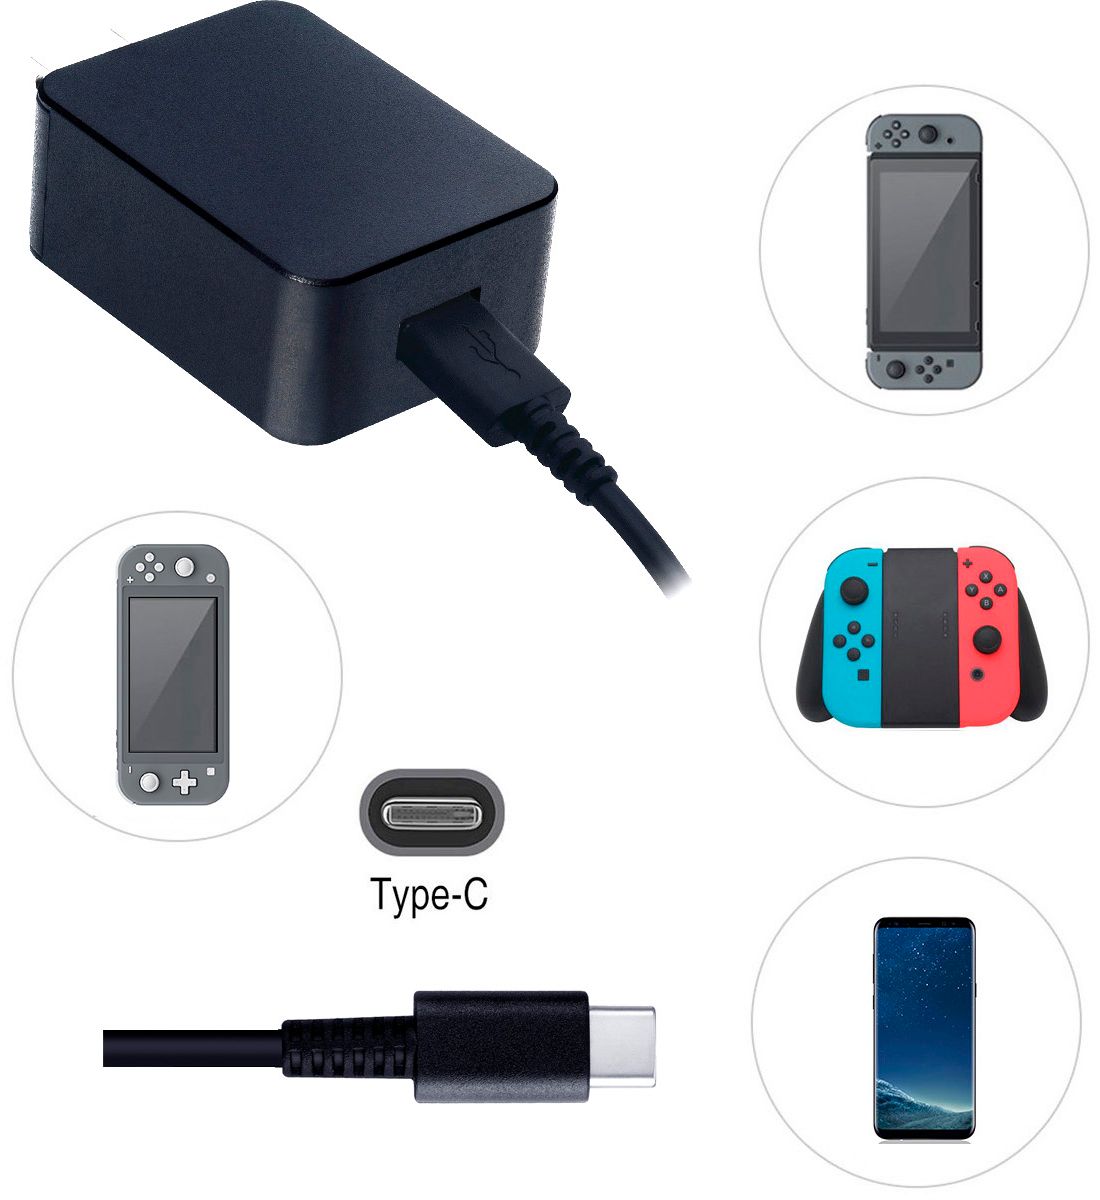 Can You Charge Your Nintendo Switch with a Phone Charger? - GadgetMates